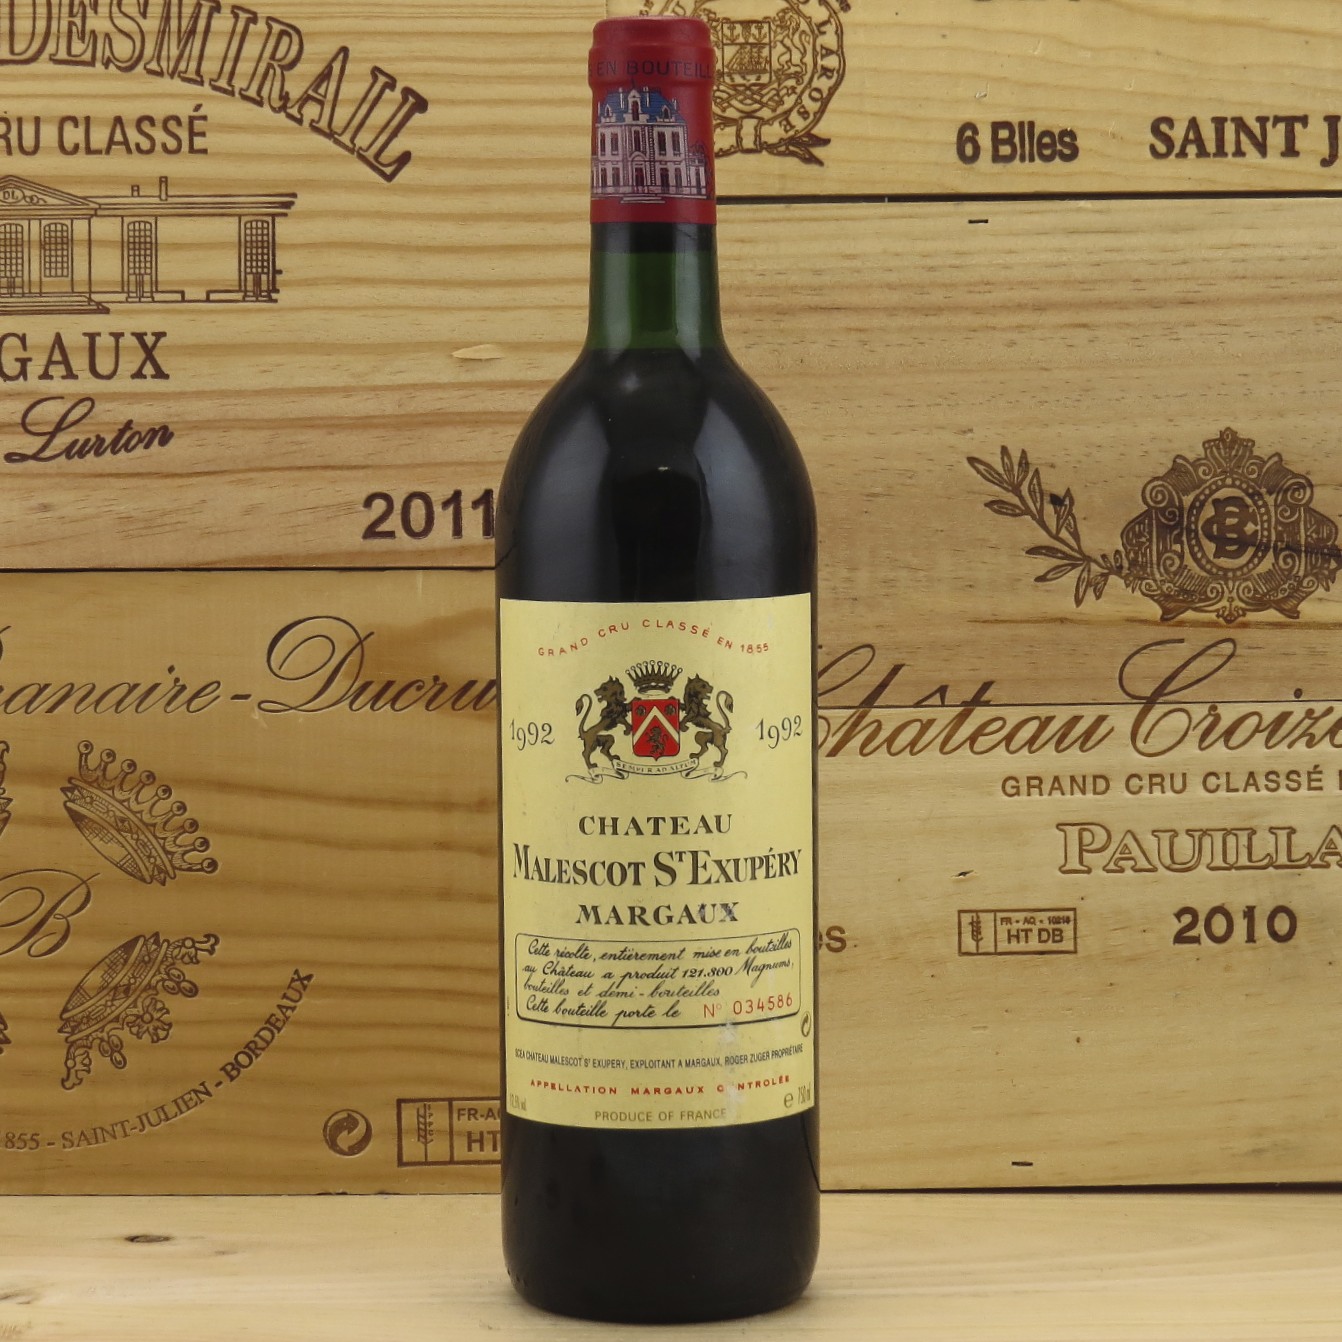 1992 Chateau Malescot St. Exupery